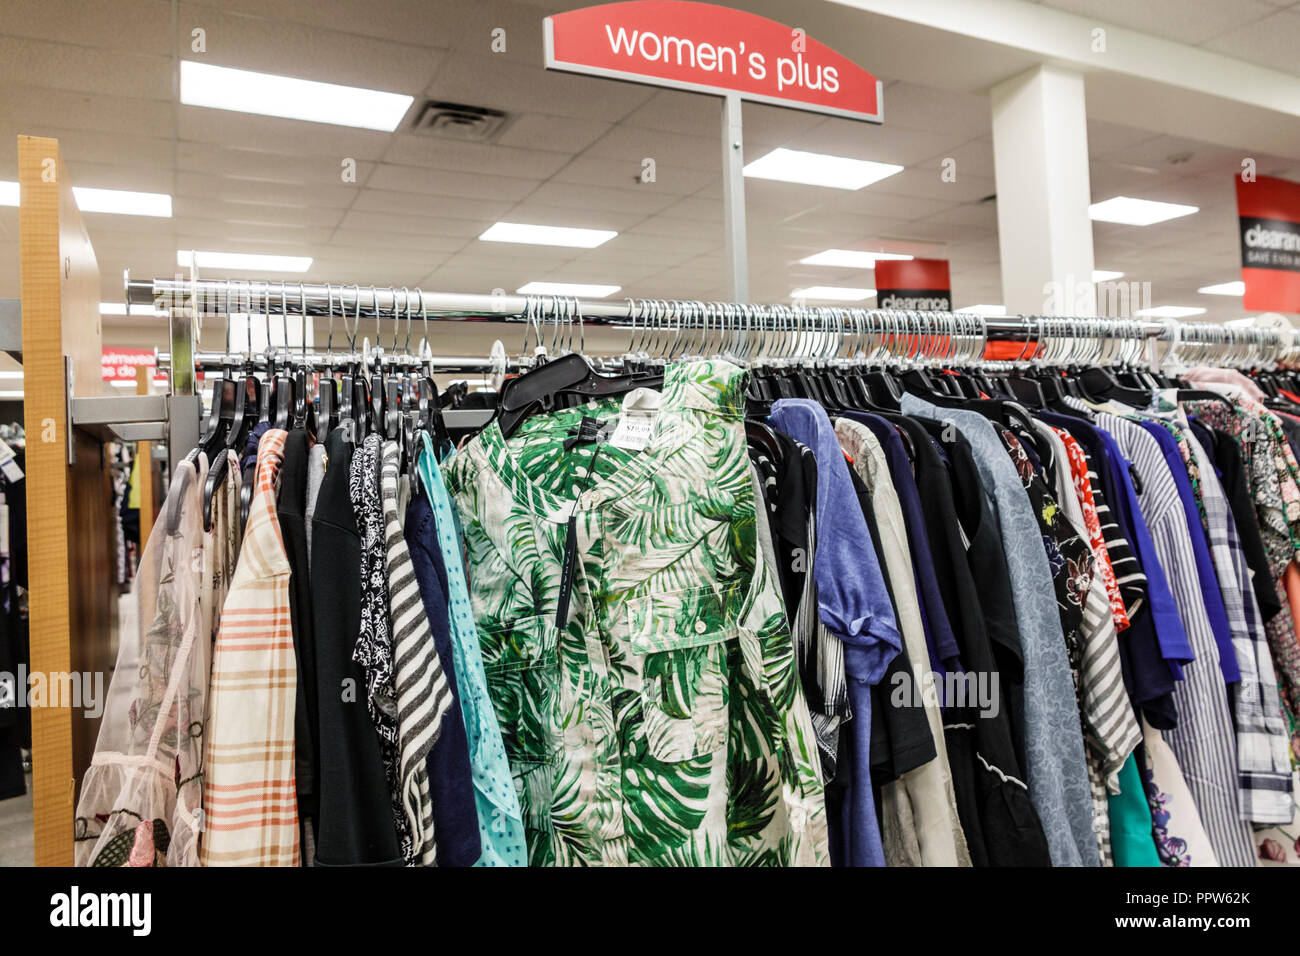 461 Tj Maxx Store Stock Photos, High-Res Pictures, and Images